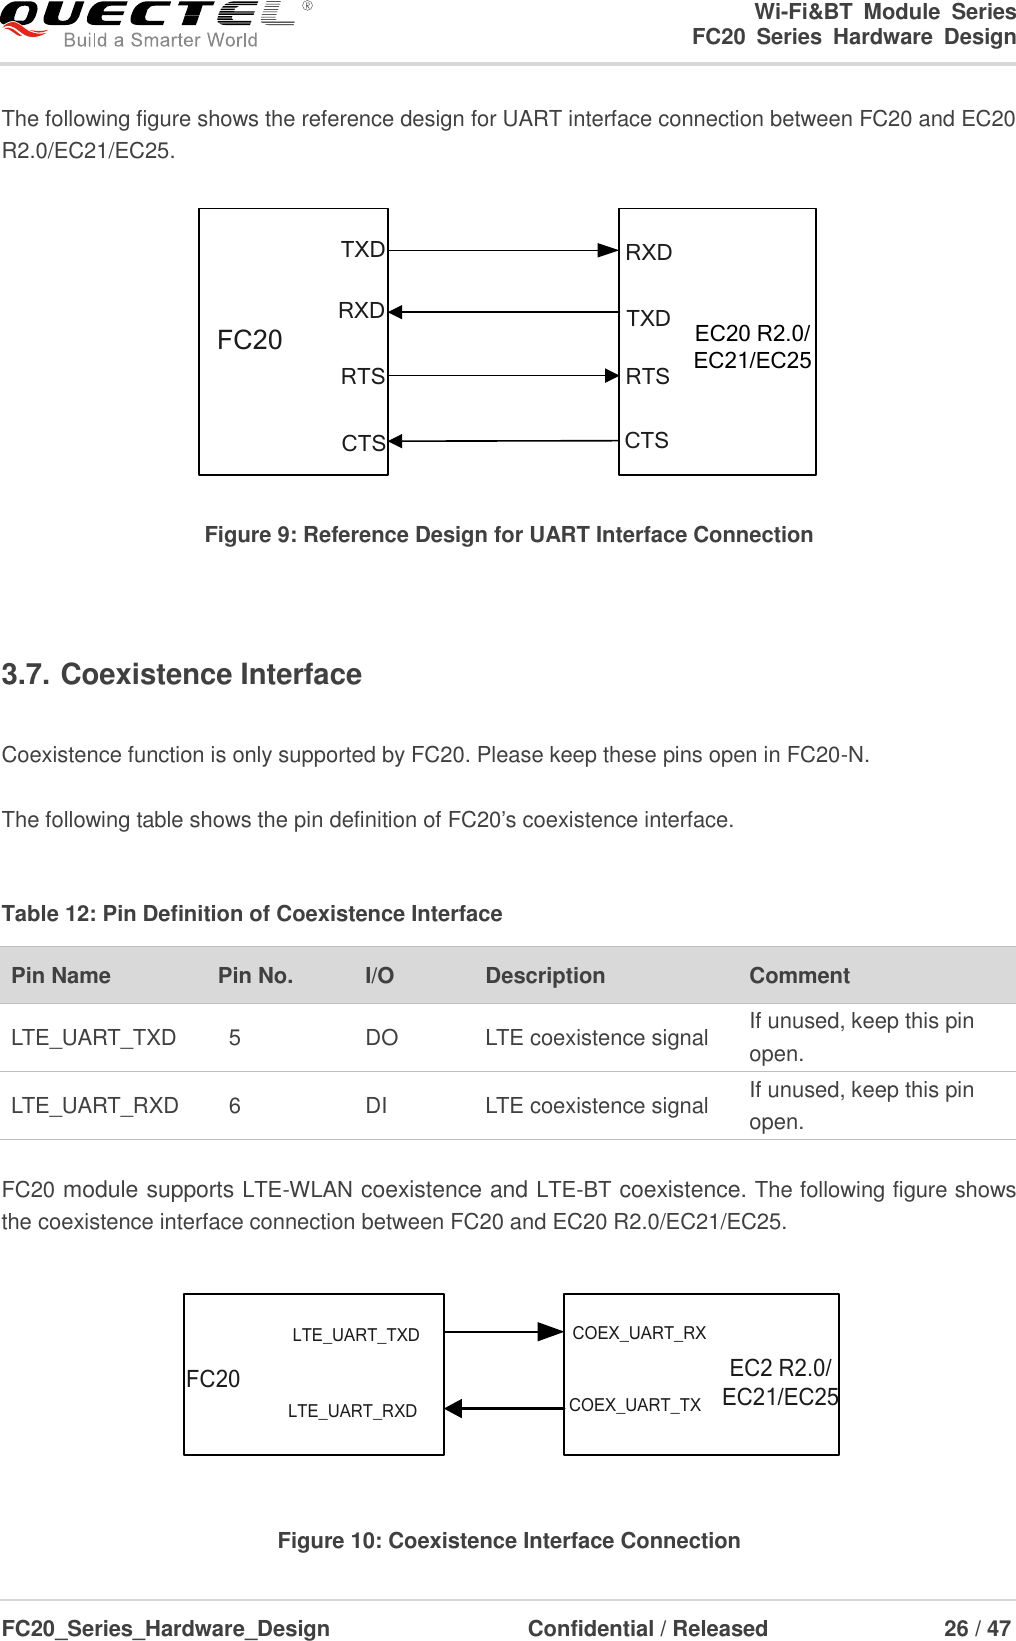                                                                        Wi-Fi&amp;BT  Module  Series                                                               FC20  Series  Hardware  Design  FC20_Series_Hardware_Design                                    Confidential / Released                    26 / 47    The following figure shows the reference design for UART interface connection between FC20 and EC20 R2.0/EC21/EC25. CTSRTSRXDTXDFC20RXDTXDRTSCTSEC20 R2.0/EC21/EC25   Figure 9: Reference Design for UART Interface Connection    3.7. Coexistence Interface  Coexistence function is only supported by FC20. Please keep these pins open in FC20-N.    The following table shows the pin definition of FC20’s coexistence interface.  Table 12: Pin Definition of Coexistence Interface Pin Name   Pin No. I/O Description   Comment LTE_UART_TXD 5 DO LTE coexistence signal If unused, keep this pin open. LTE_UART_RXD 6 DI LTE coexistence signal If unused, keep this pin open.  FC20 module supports LTE-WLAN coexistence and LTE-BT coexistence. The following figure shows the coexistence interface connection between FC20 and EC20 R2.0/EC21/EC25. LTE_UART_RXDLTE_UART_TXDFC20 COEX_UART_RXCOEX_UART_TXEC2 R2.0/EC21/EC25   Figure 10: Coexistence Interface Connection   